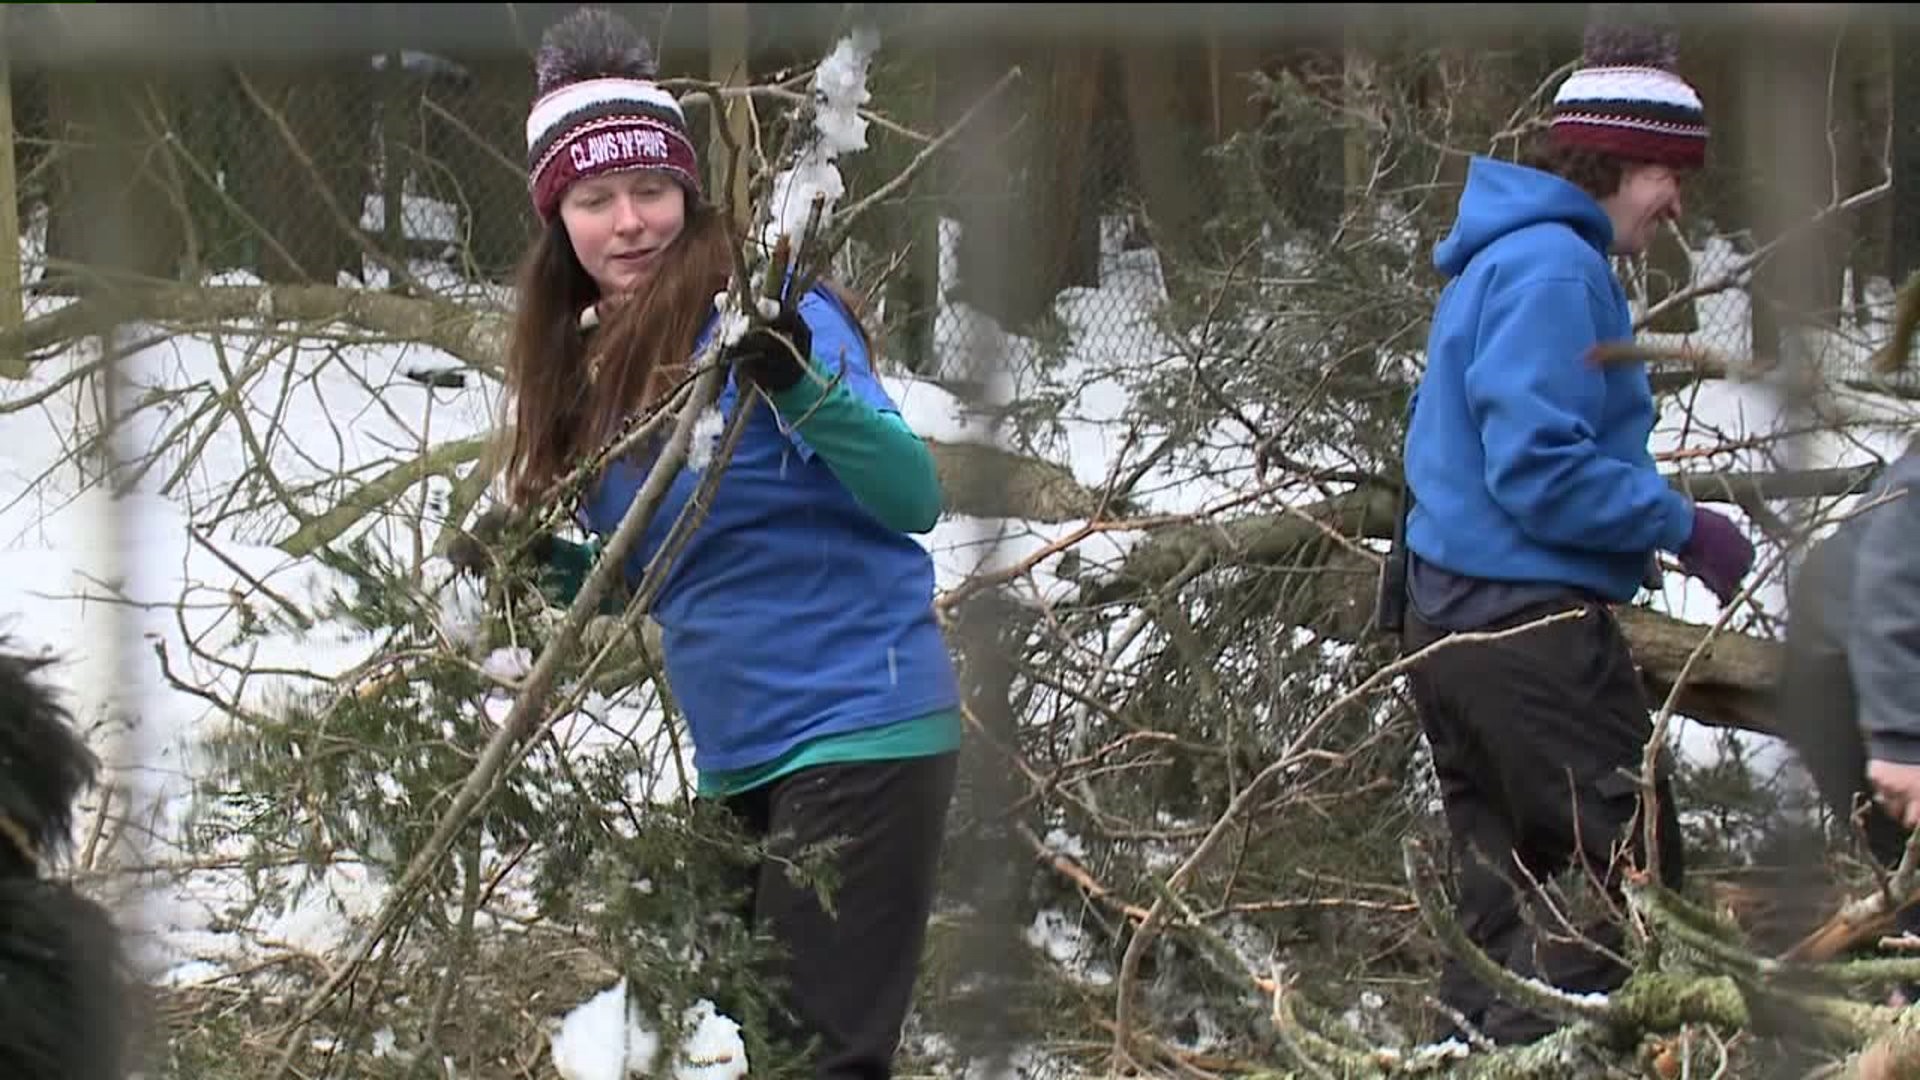 Wild Weather Forces Claws 'N' Paws Cleanup